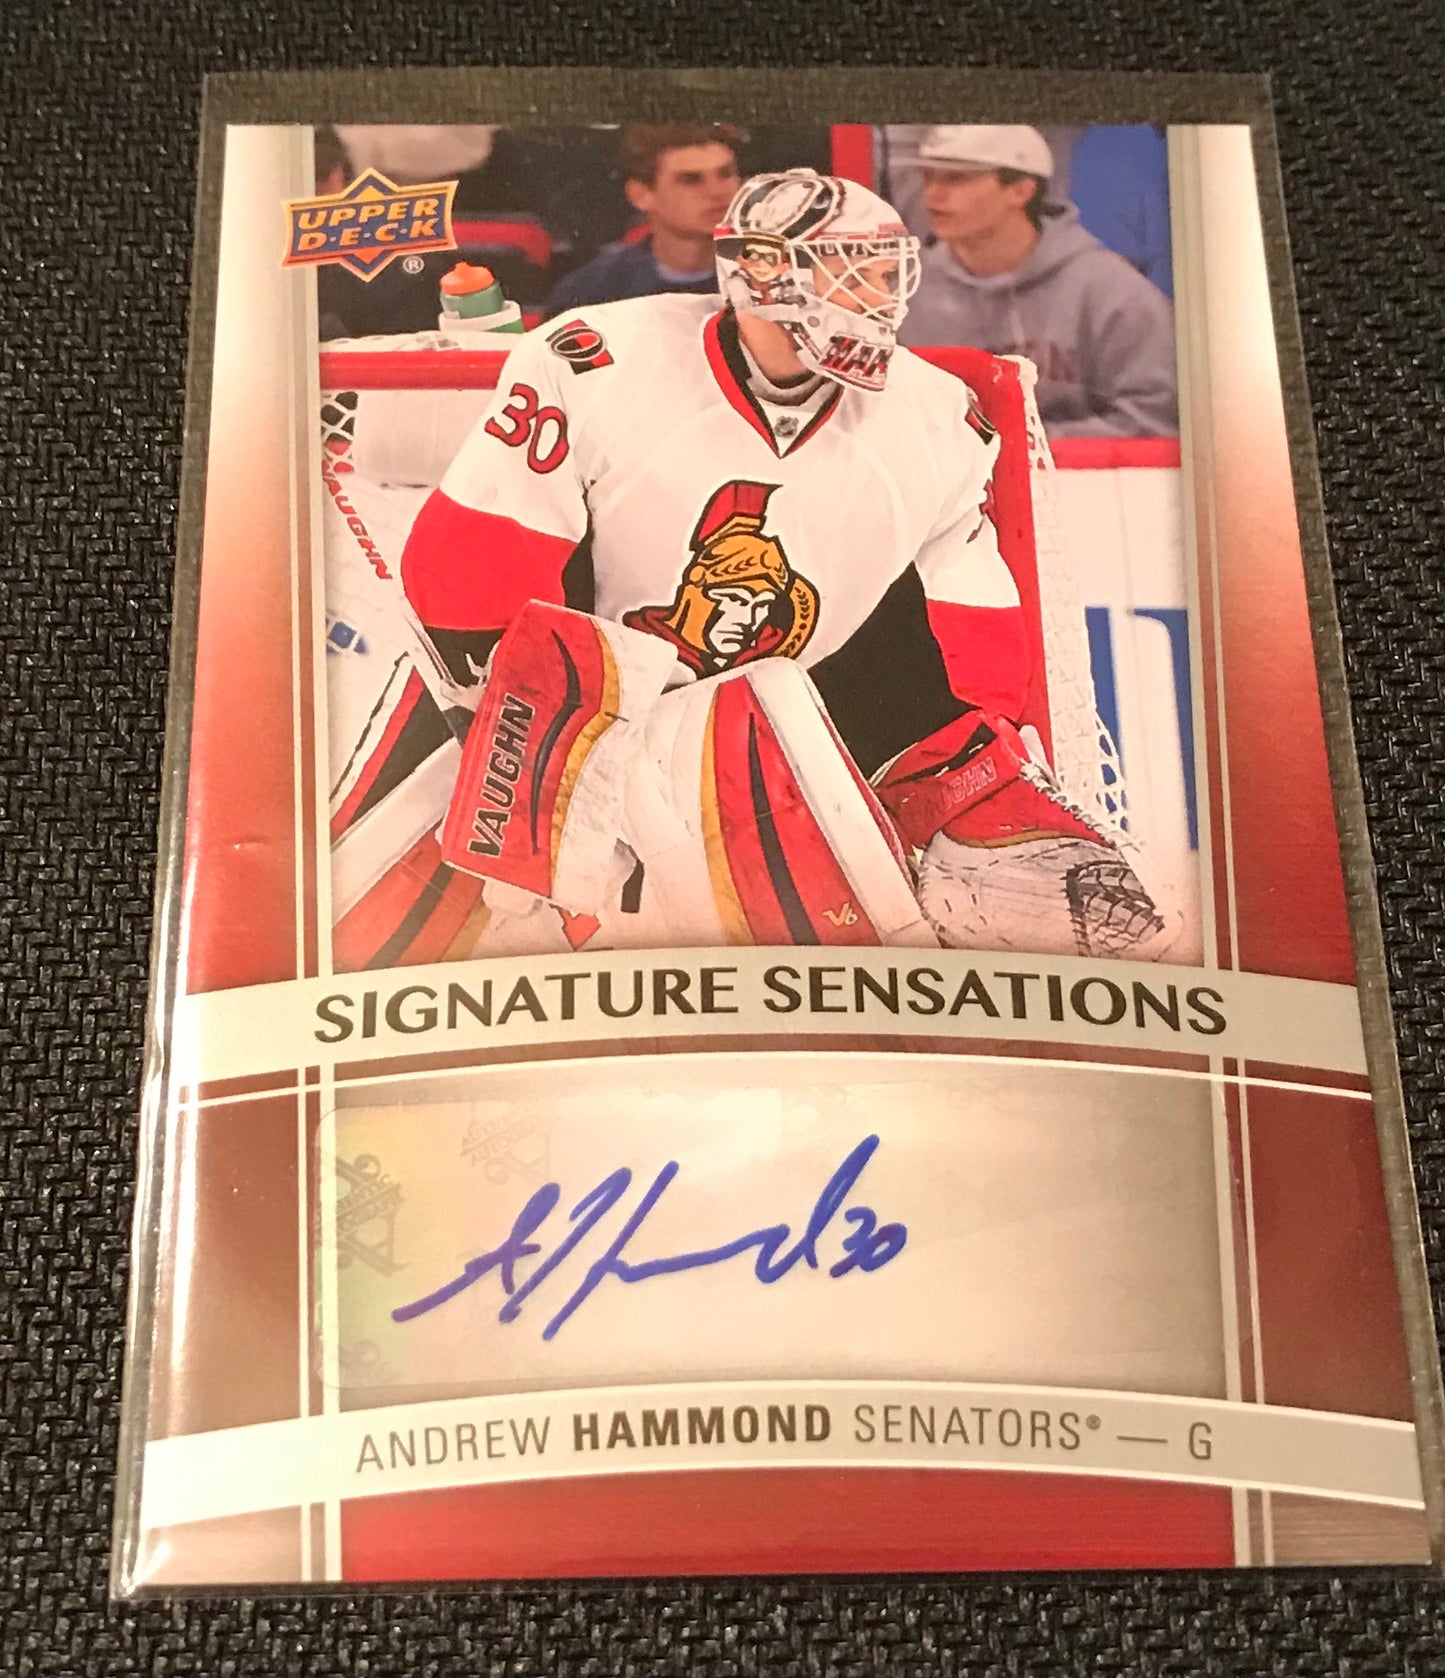 2015-16 Upper Deck Series One Andrew Hammond Autographed Card